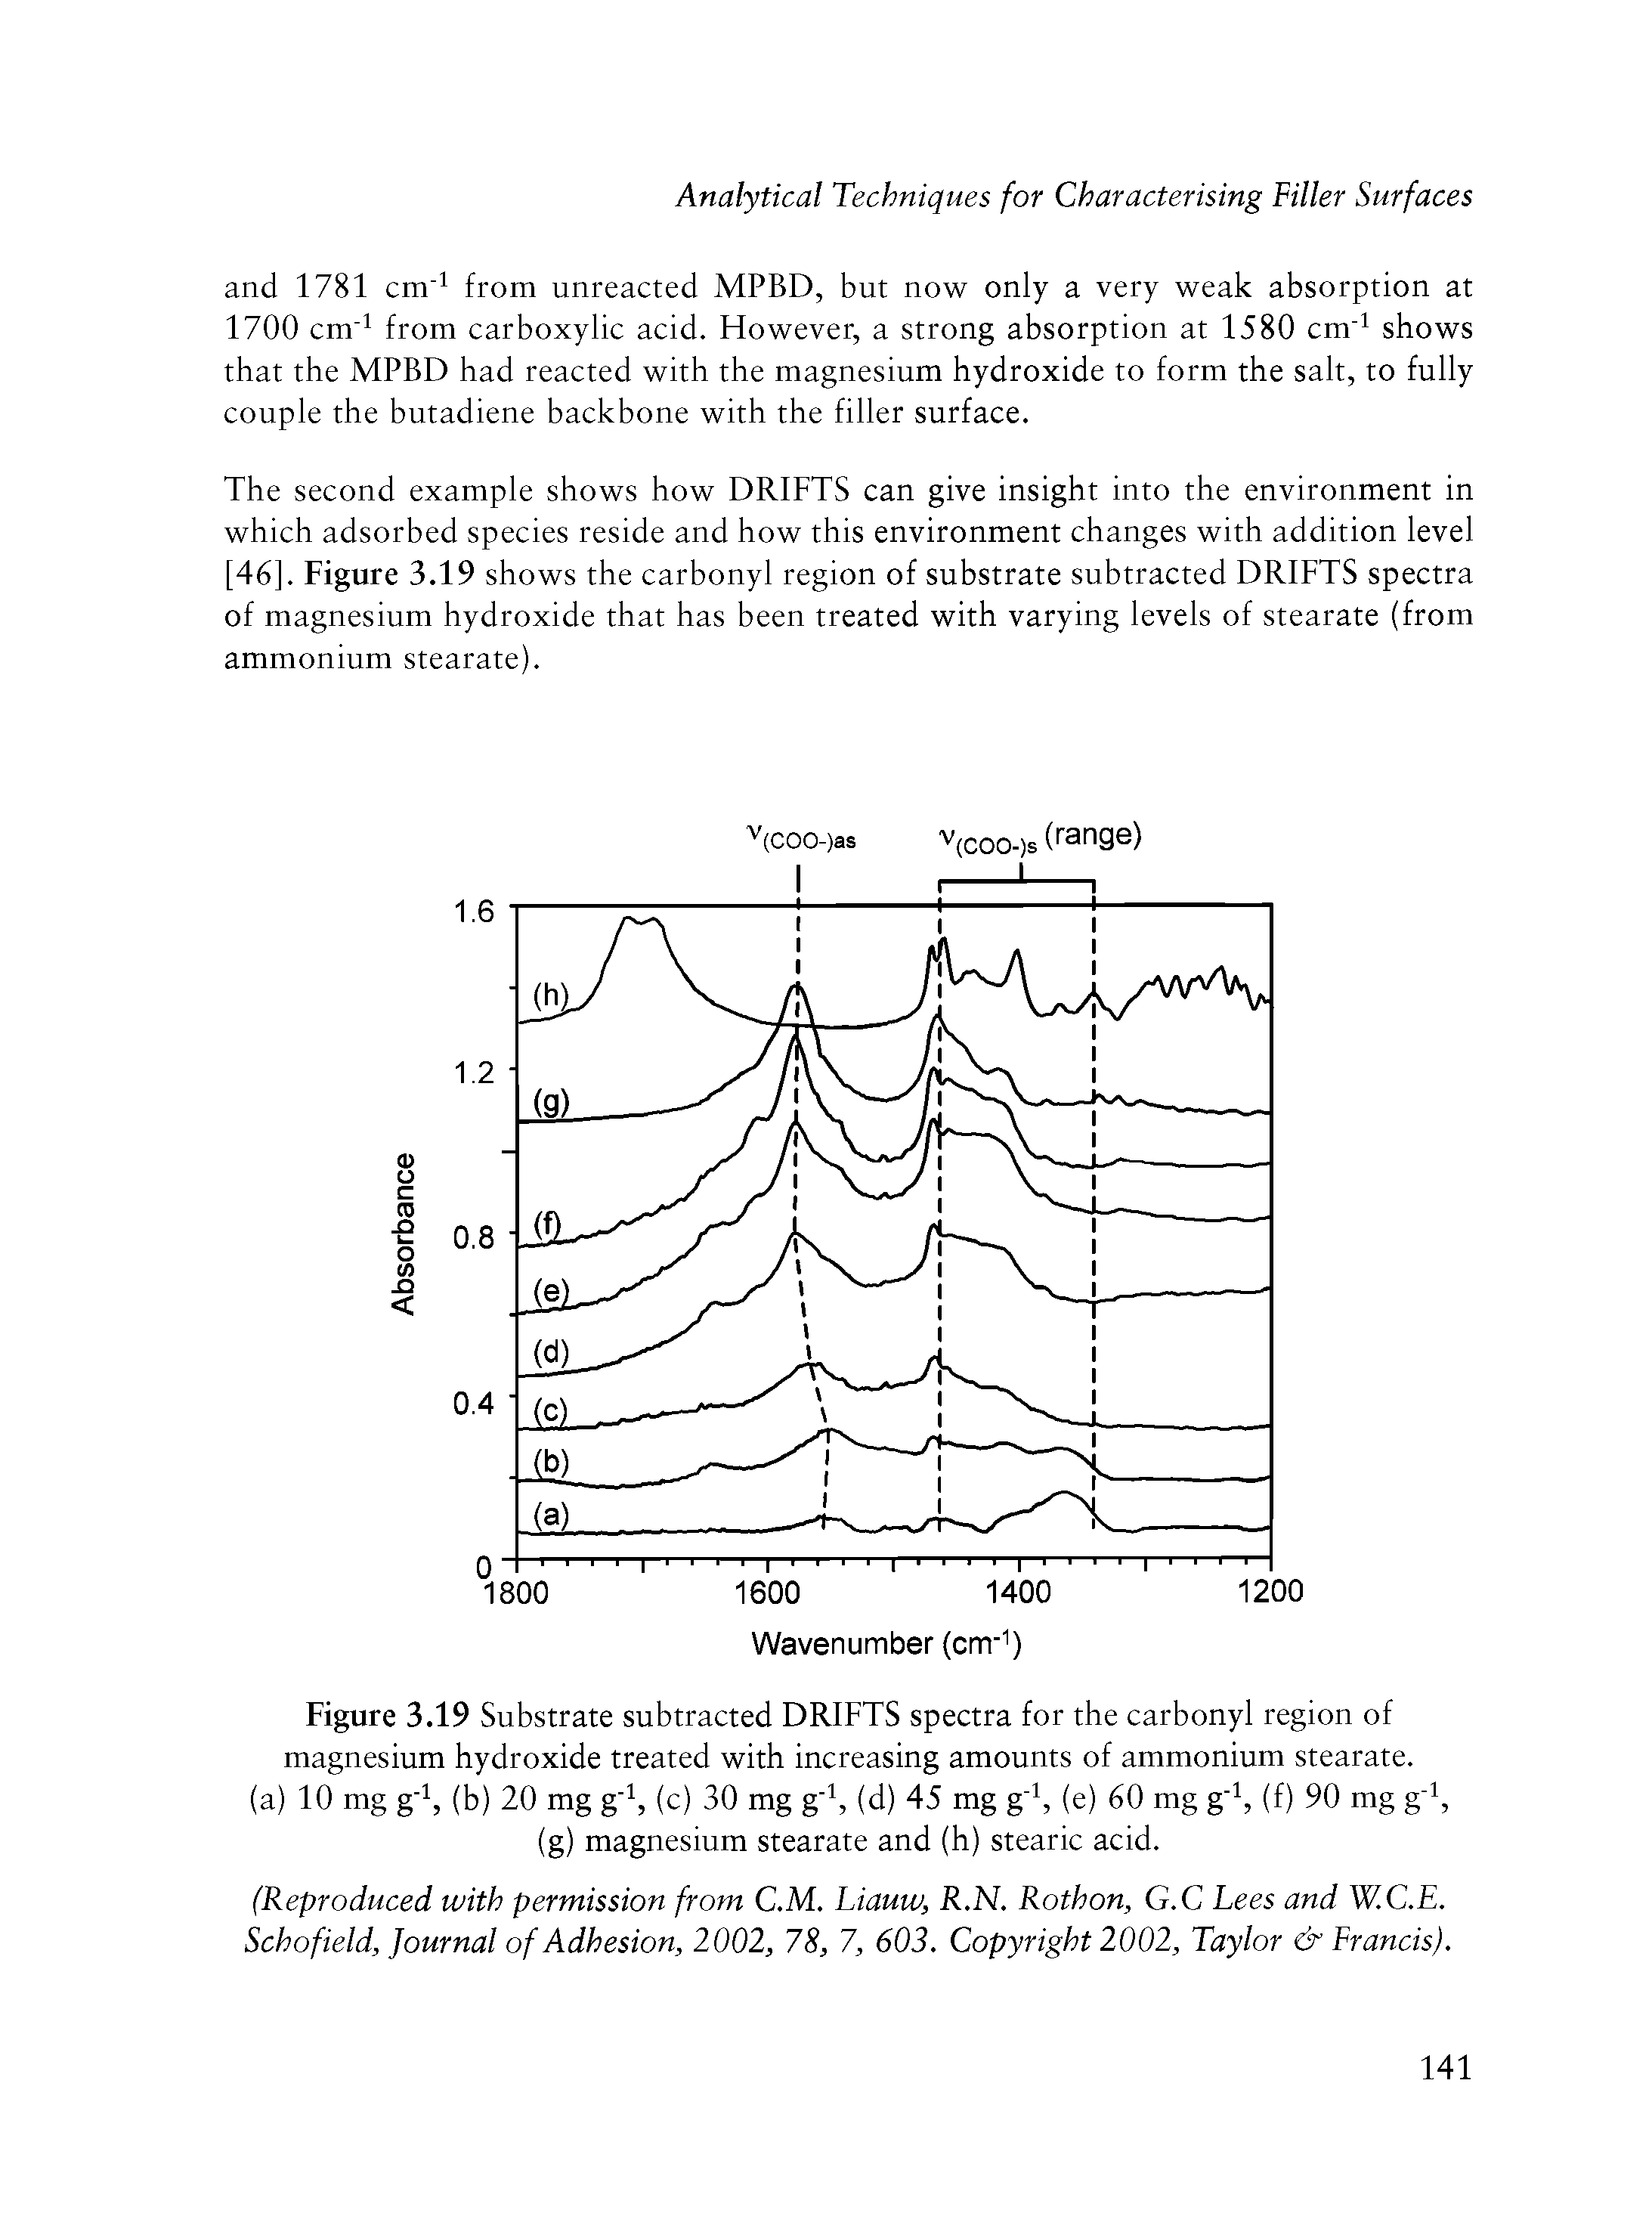 Figure 3.19 Substrate subtracted DRIFTS spectra for the carbonyl region of magnesium hydroxide treated with increasing amounts of ammonium stearate.